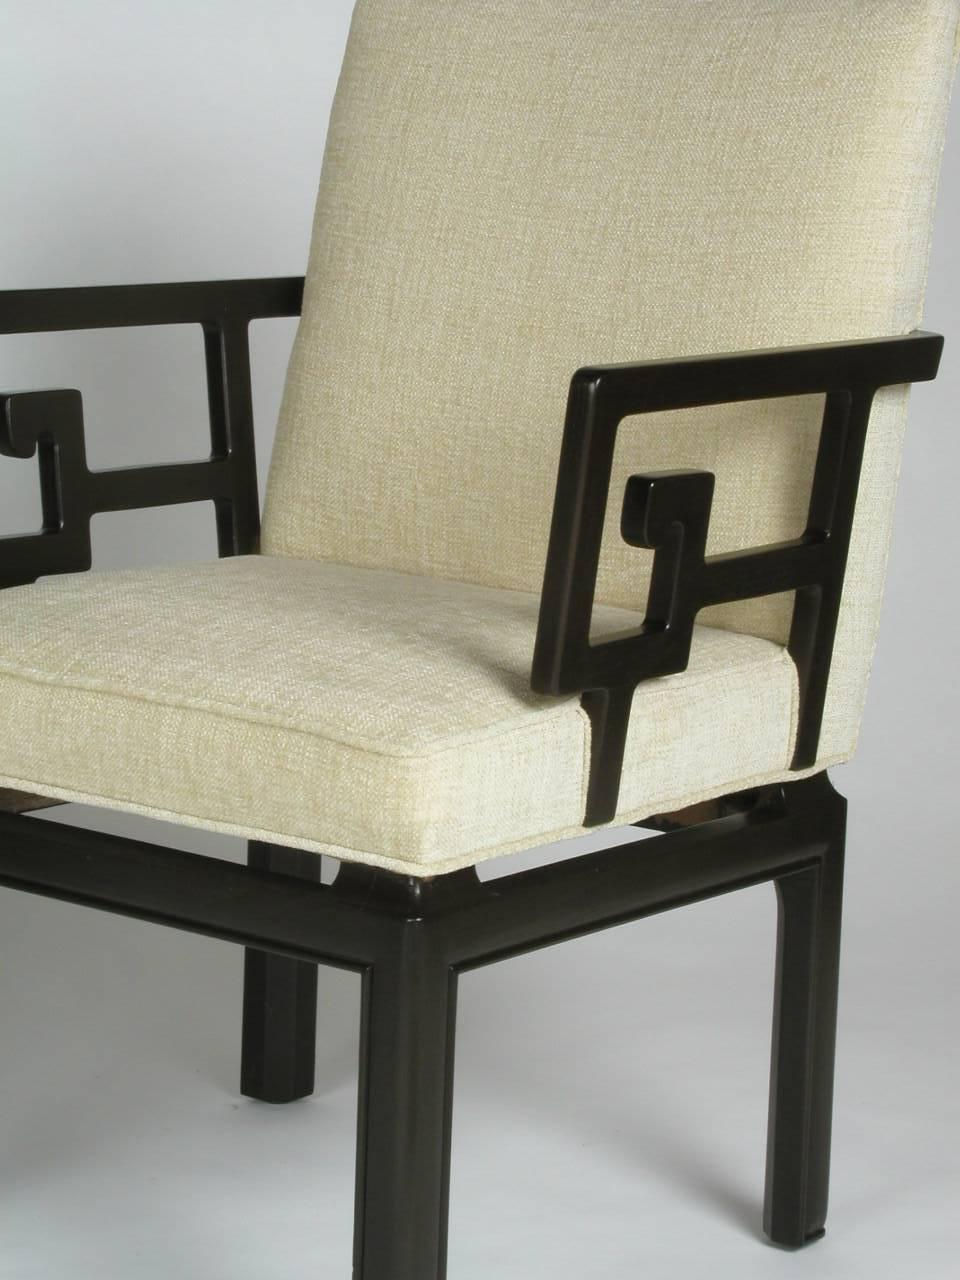 Vintage Michael Taylor Greek key armchairs for his Far East collection by Baker Furniture. In the style of James Mont, with stylized Greek key arms and thick rounded legs. Includes frames refinished. Current set shown is sold, another pair